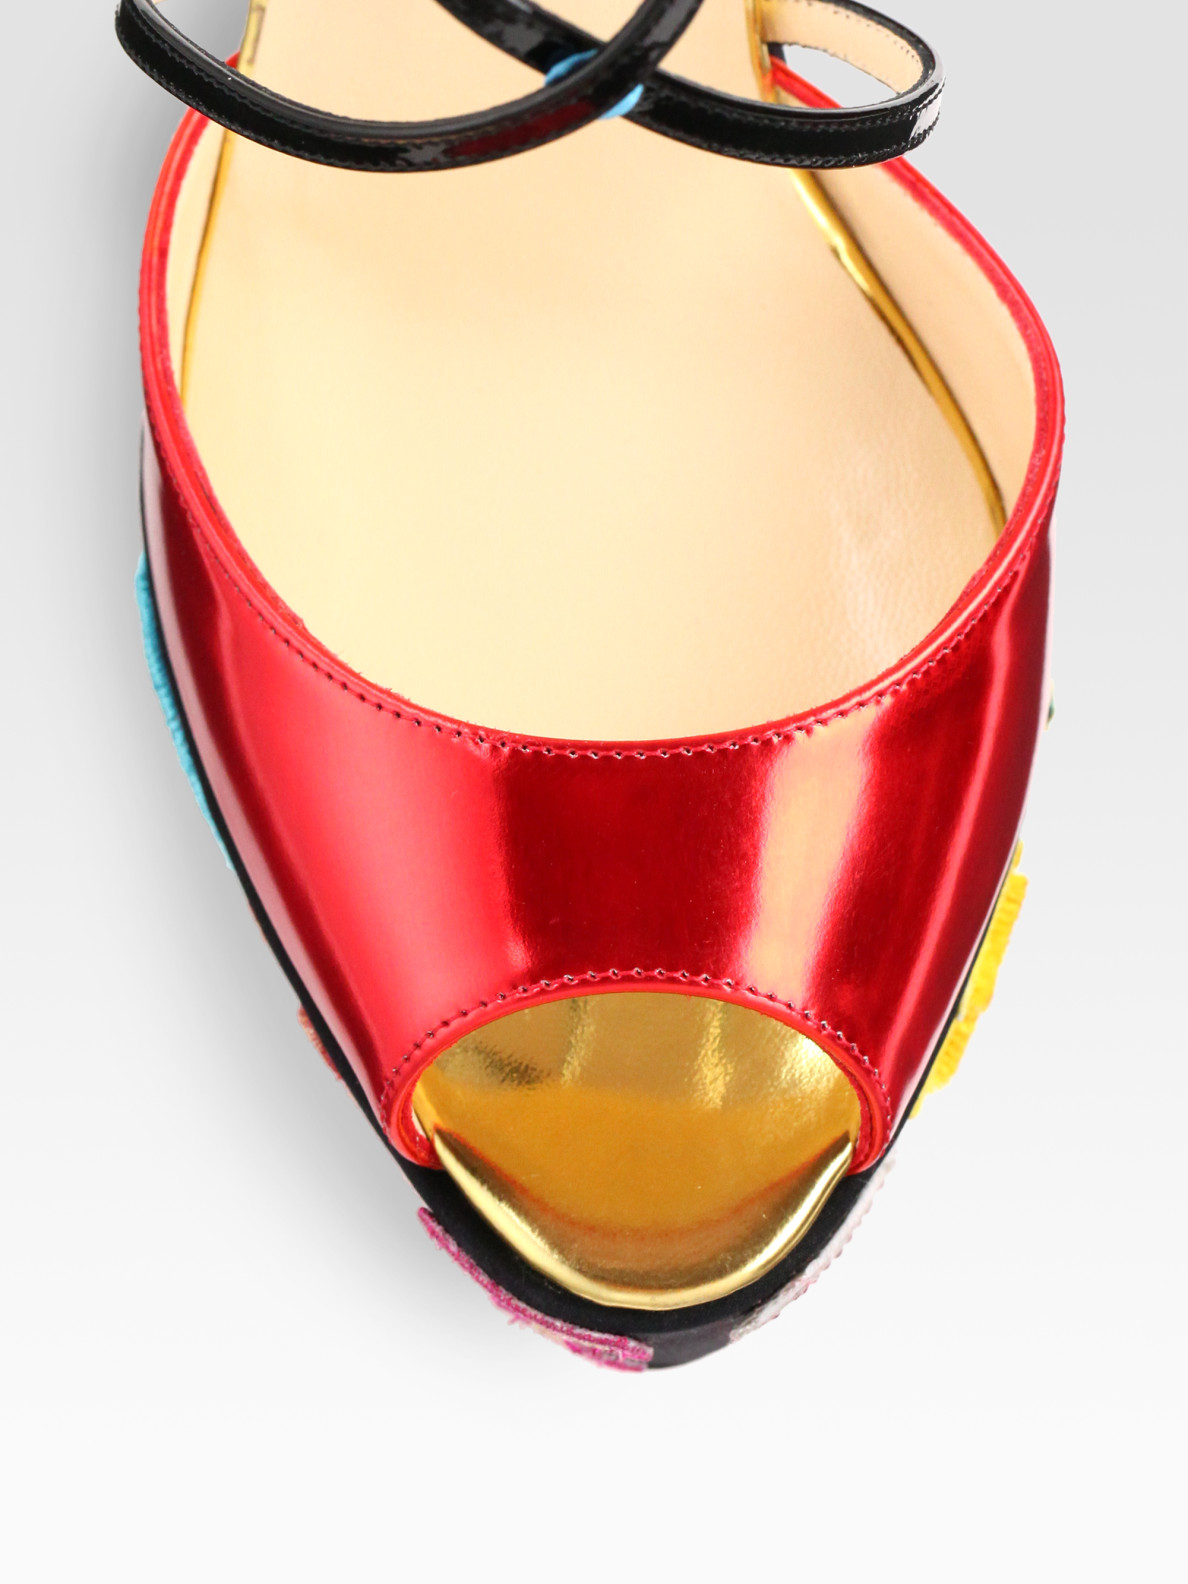 gold spiked loafers mens - Christian louboutin Embellished Patent Leather and Metallic ...